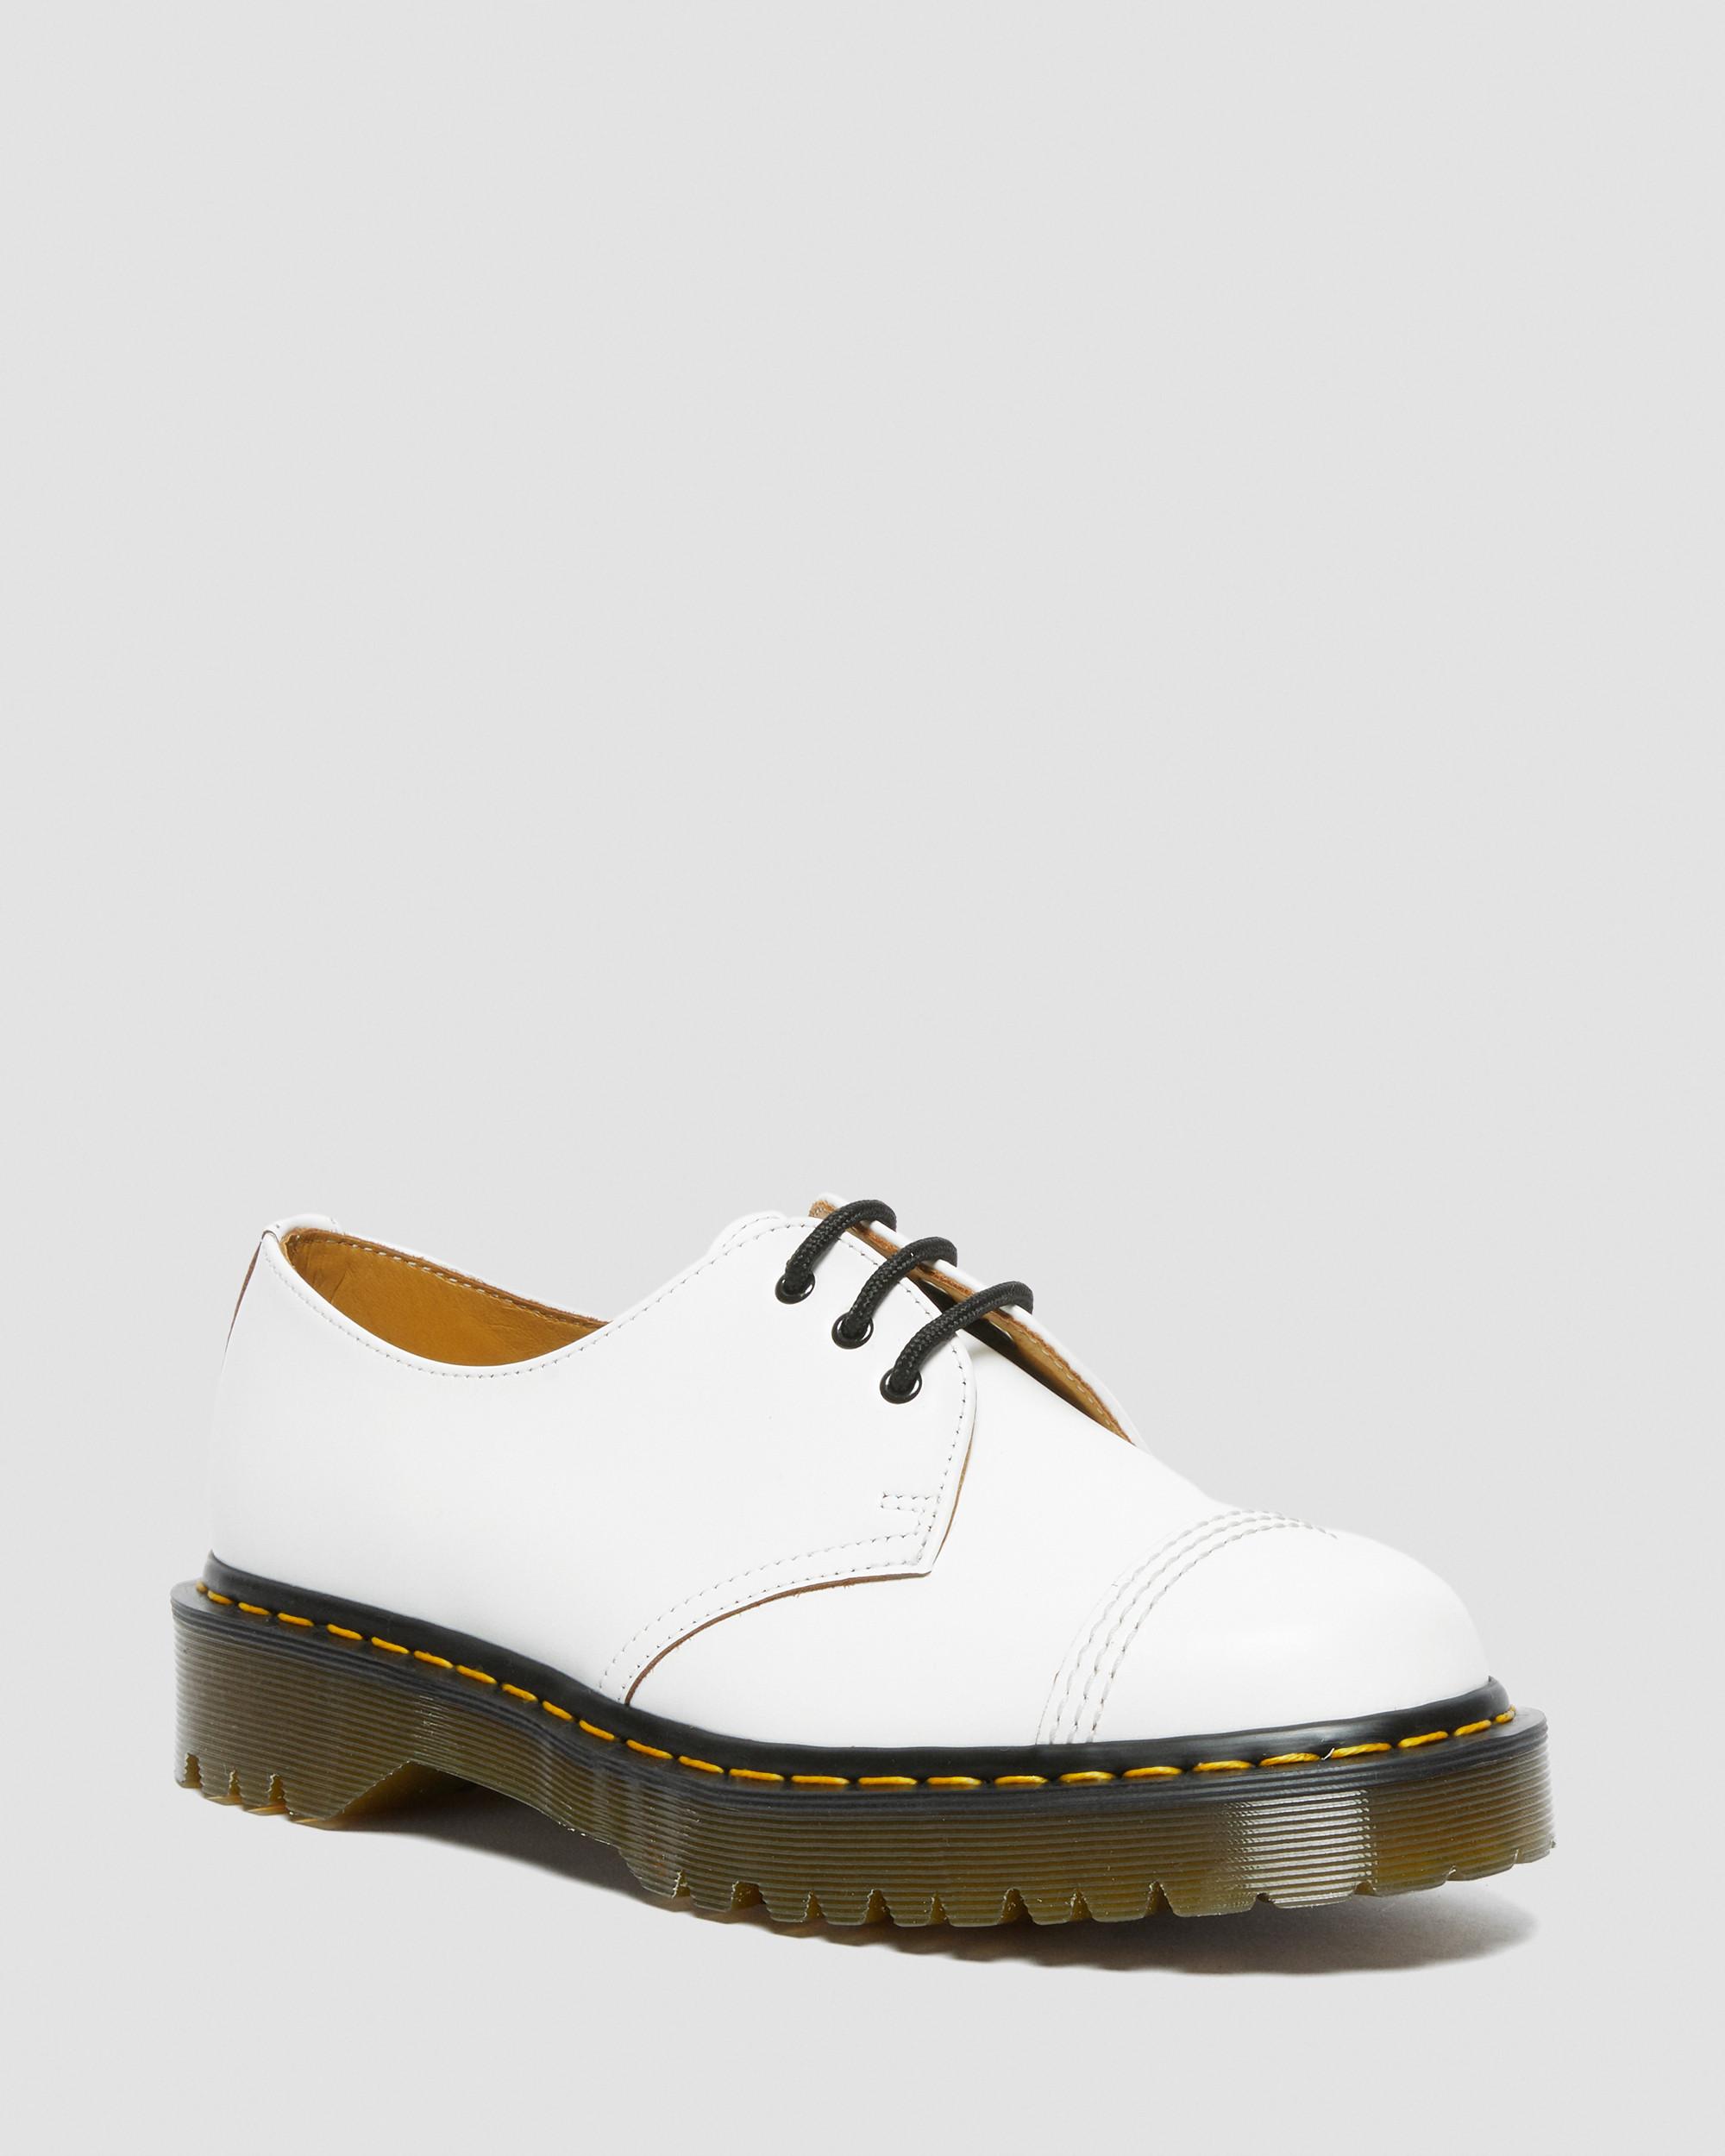 1461 Bex Made in England Toe Cap Oxford Shoes | Dr. Martens